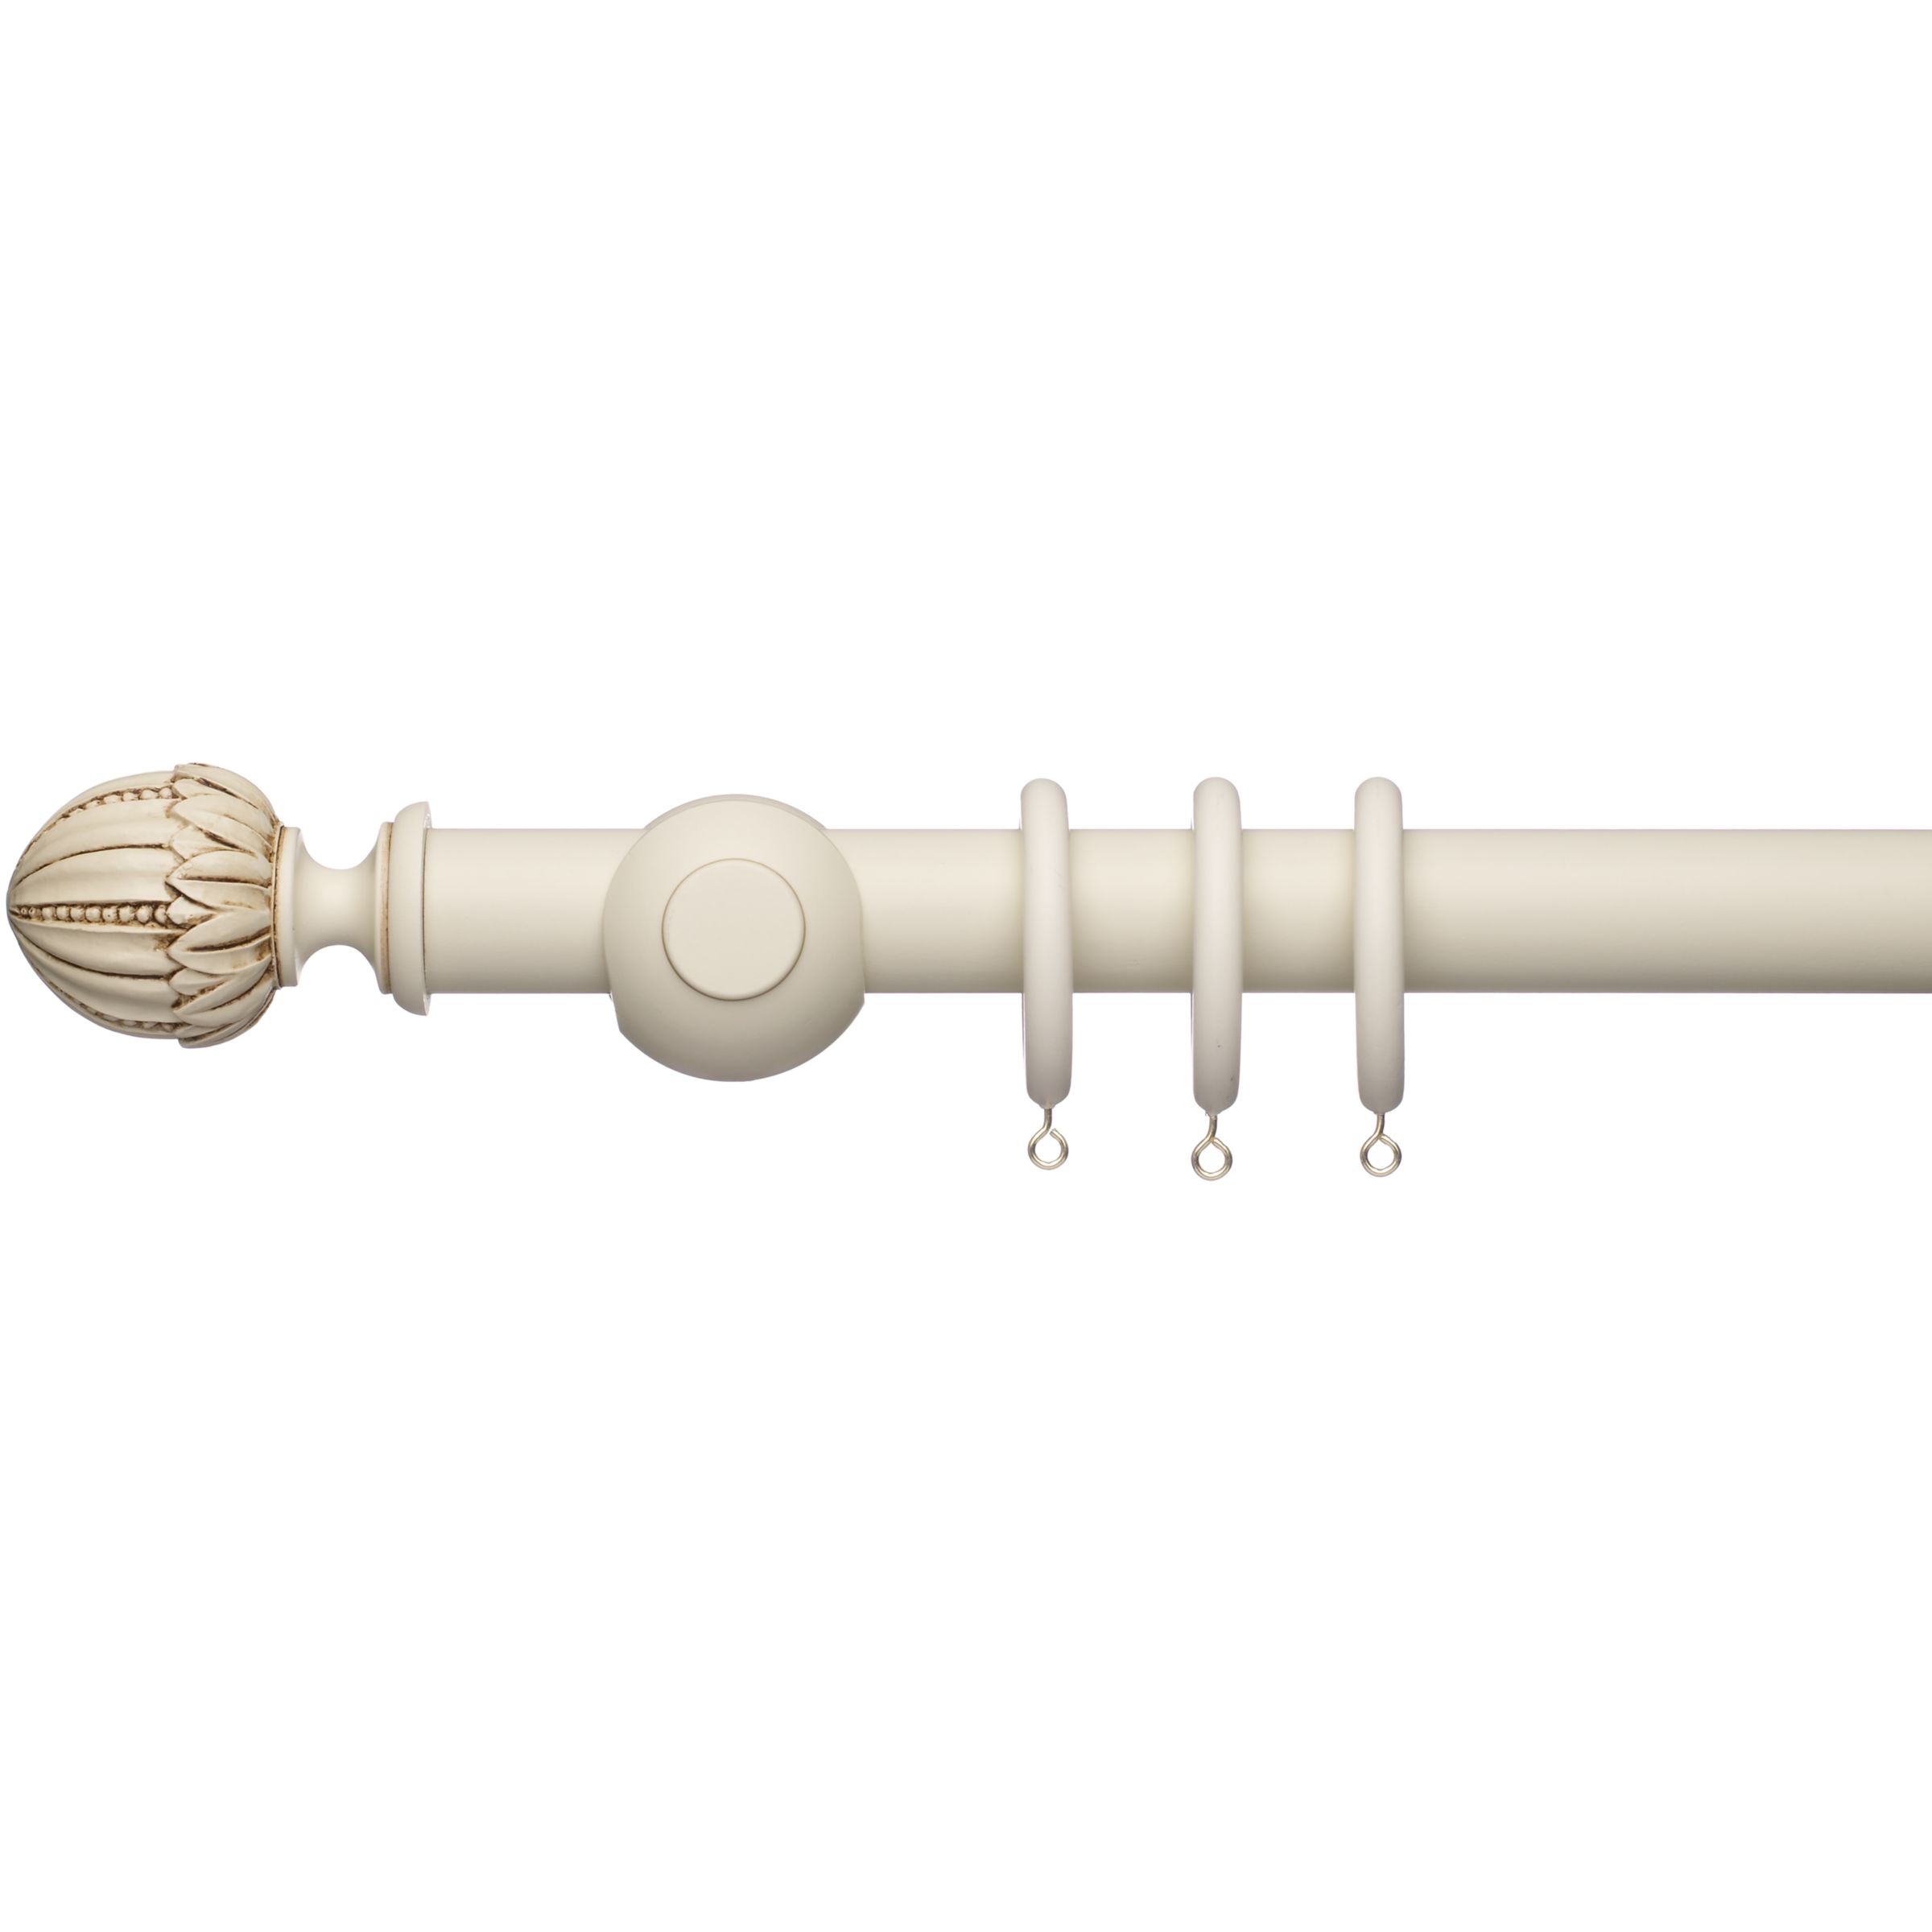 Antiqued Painted Wood Curtain Pole